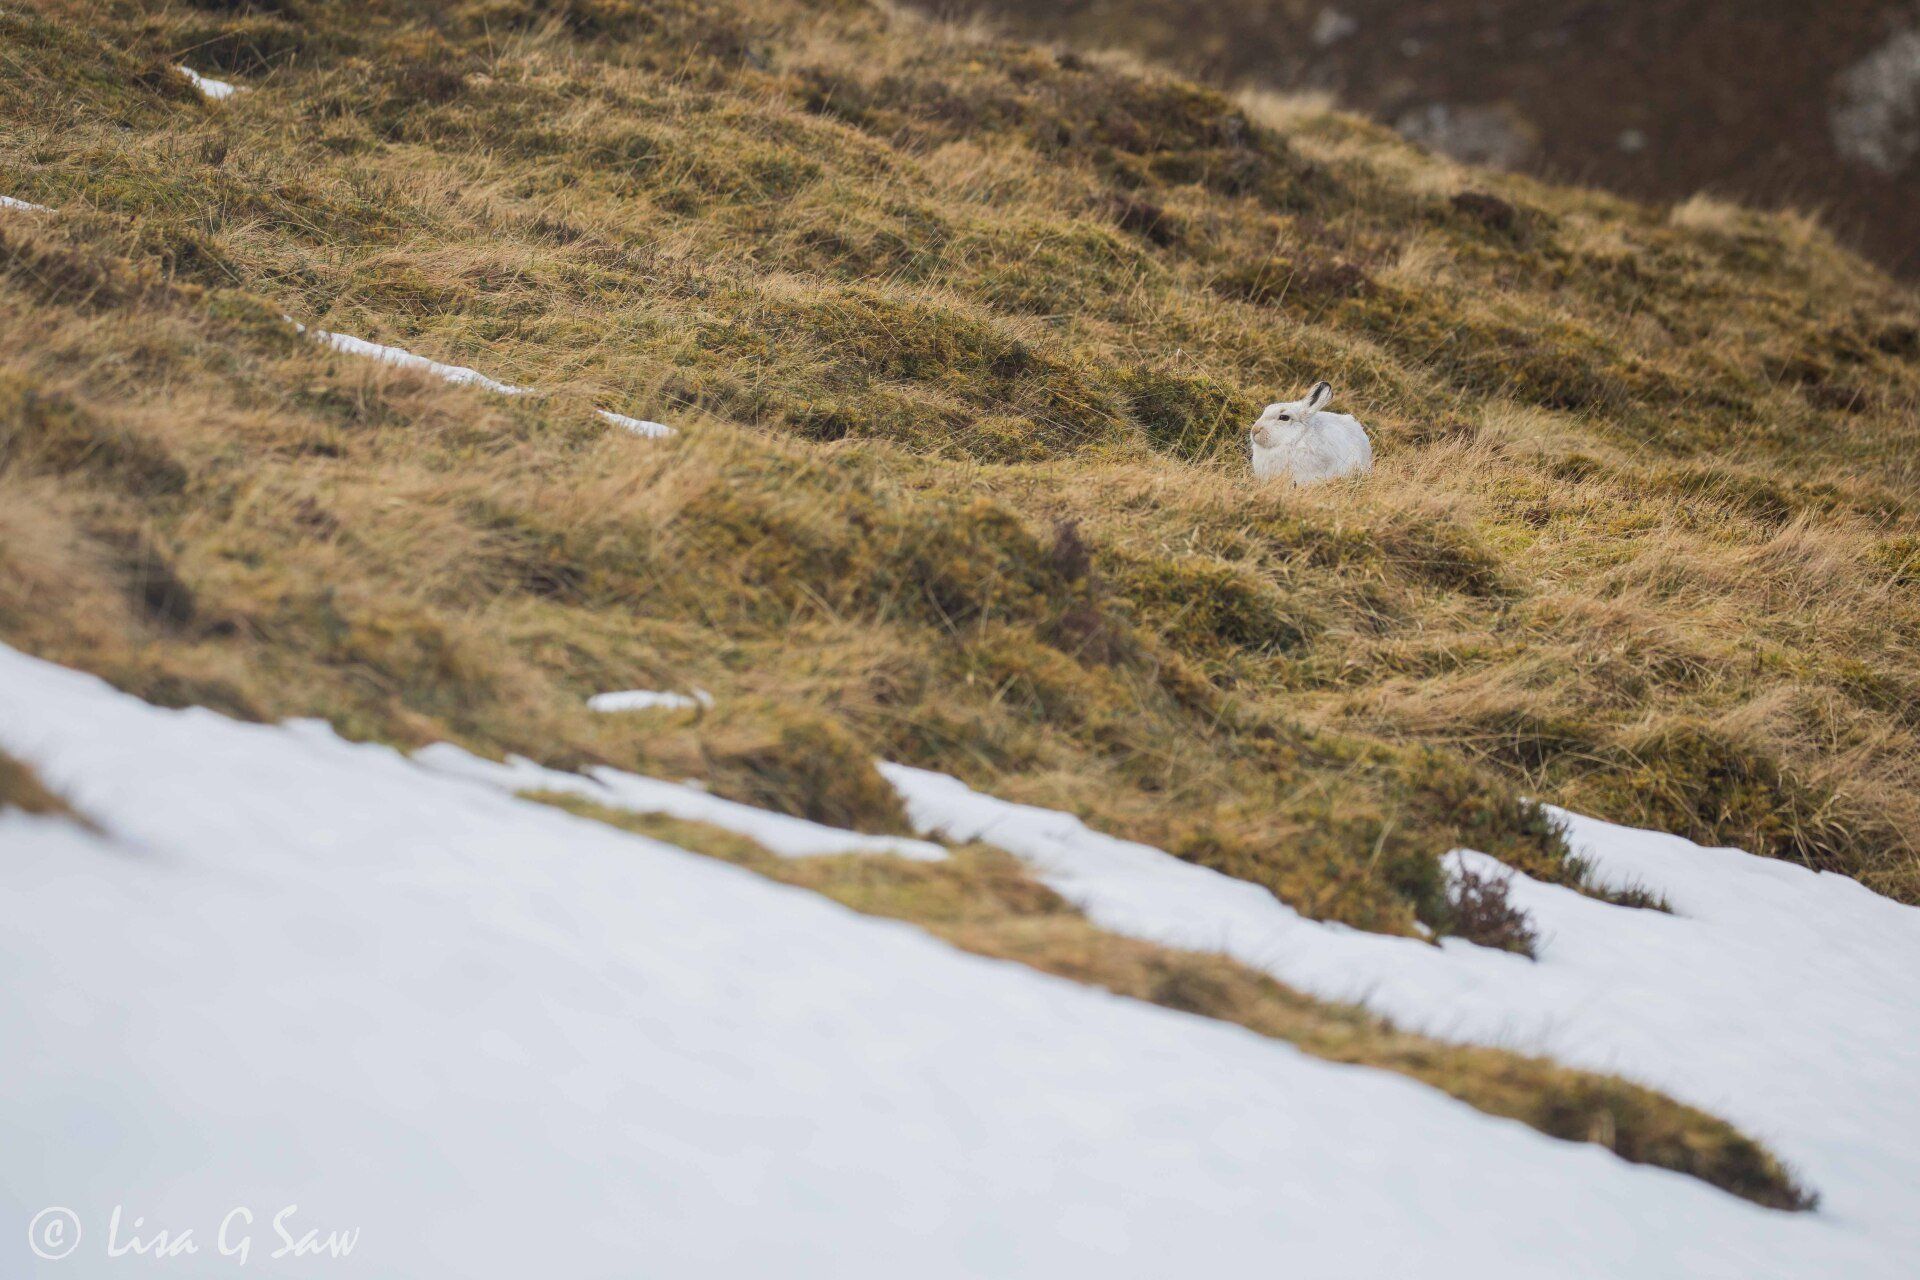 White Mountain Hare in winter pelage with snow patches